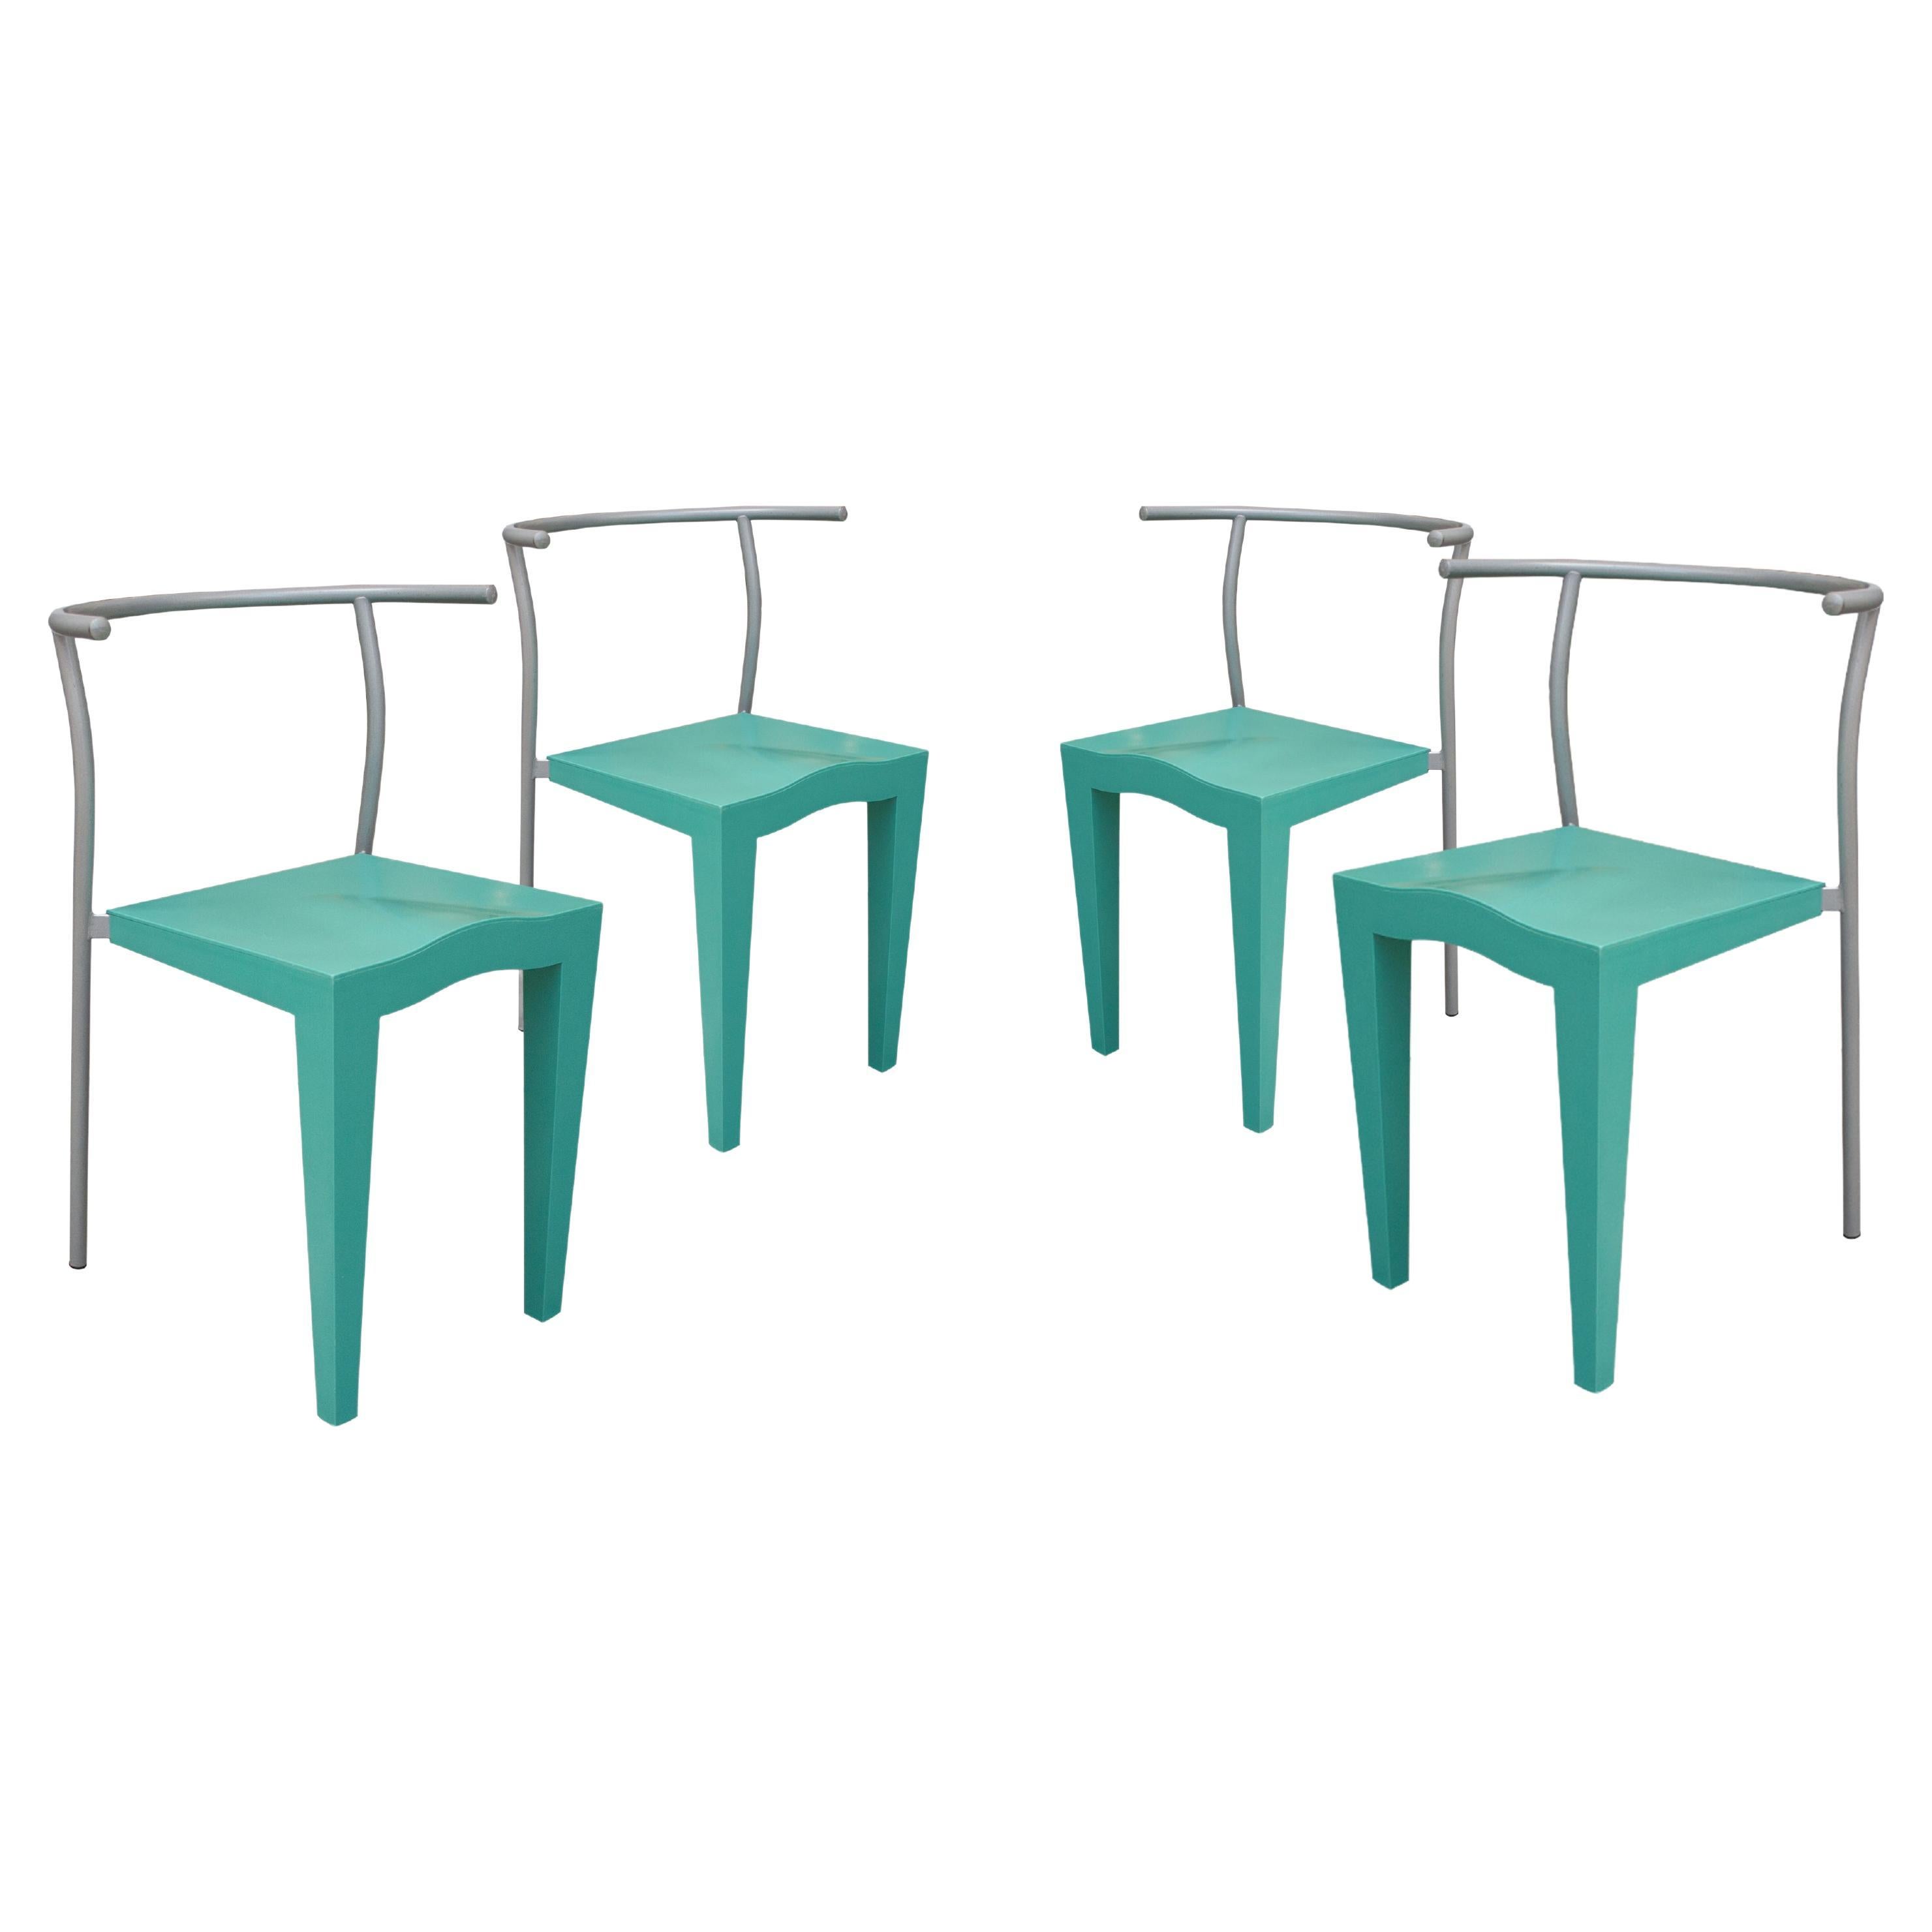 Phillippe Stark Dr.Glob Turquoise Set of Chairs, Italy, 1988